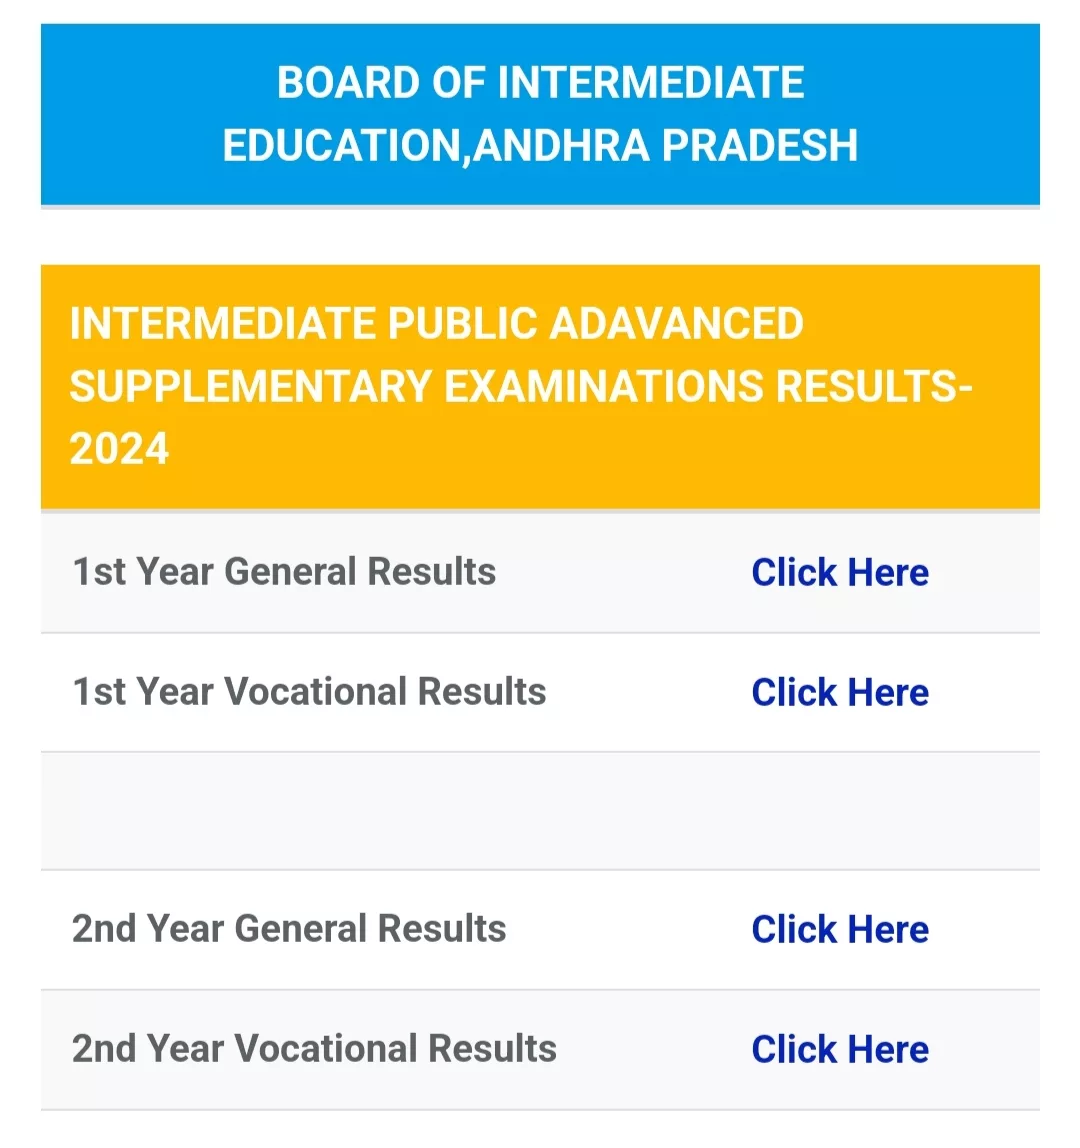 AP Inter First Year Supply Result 2024